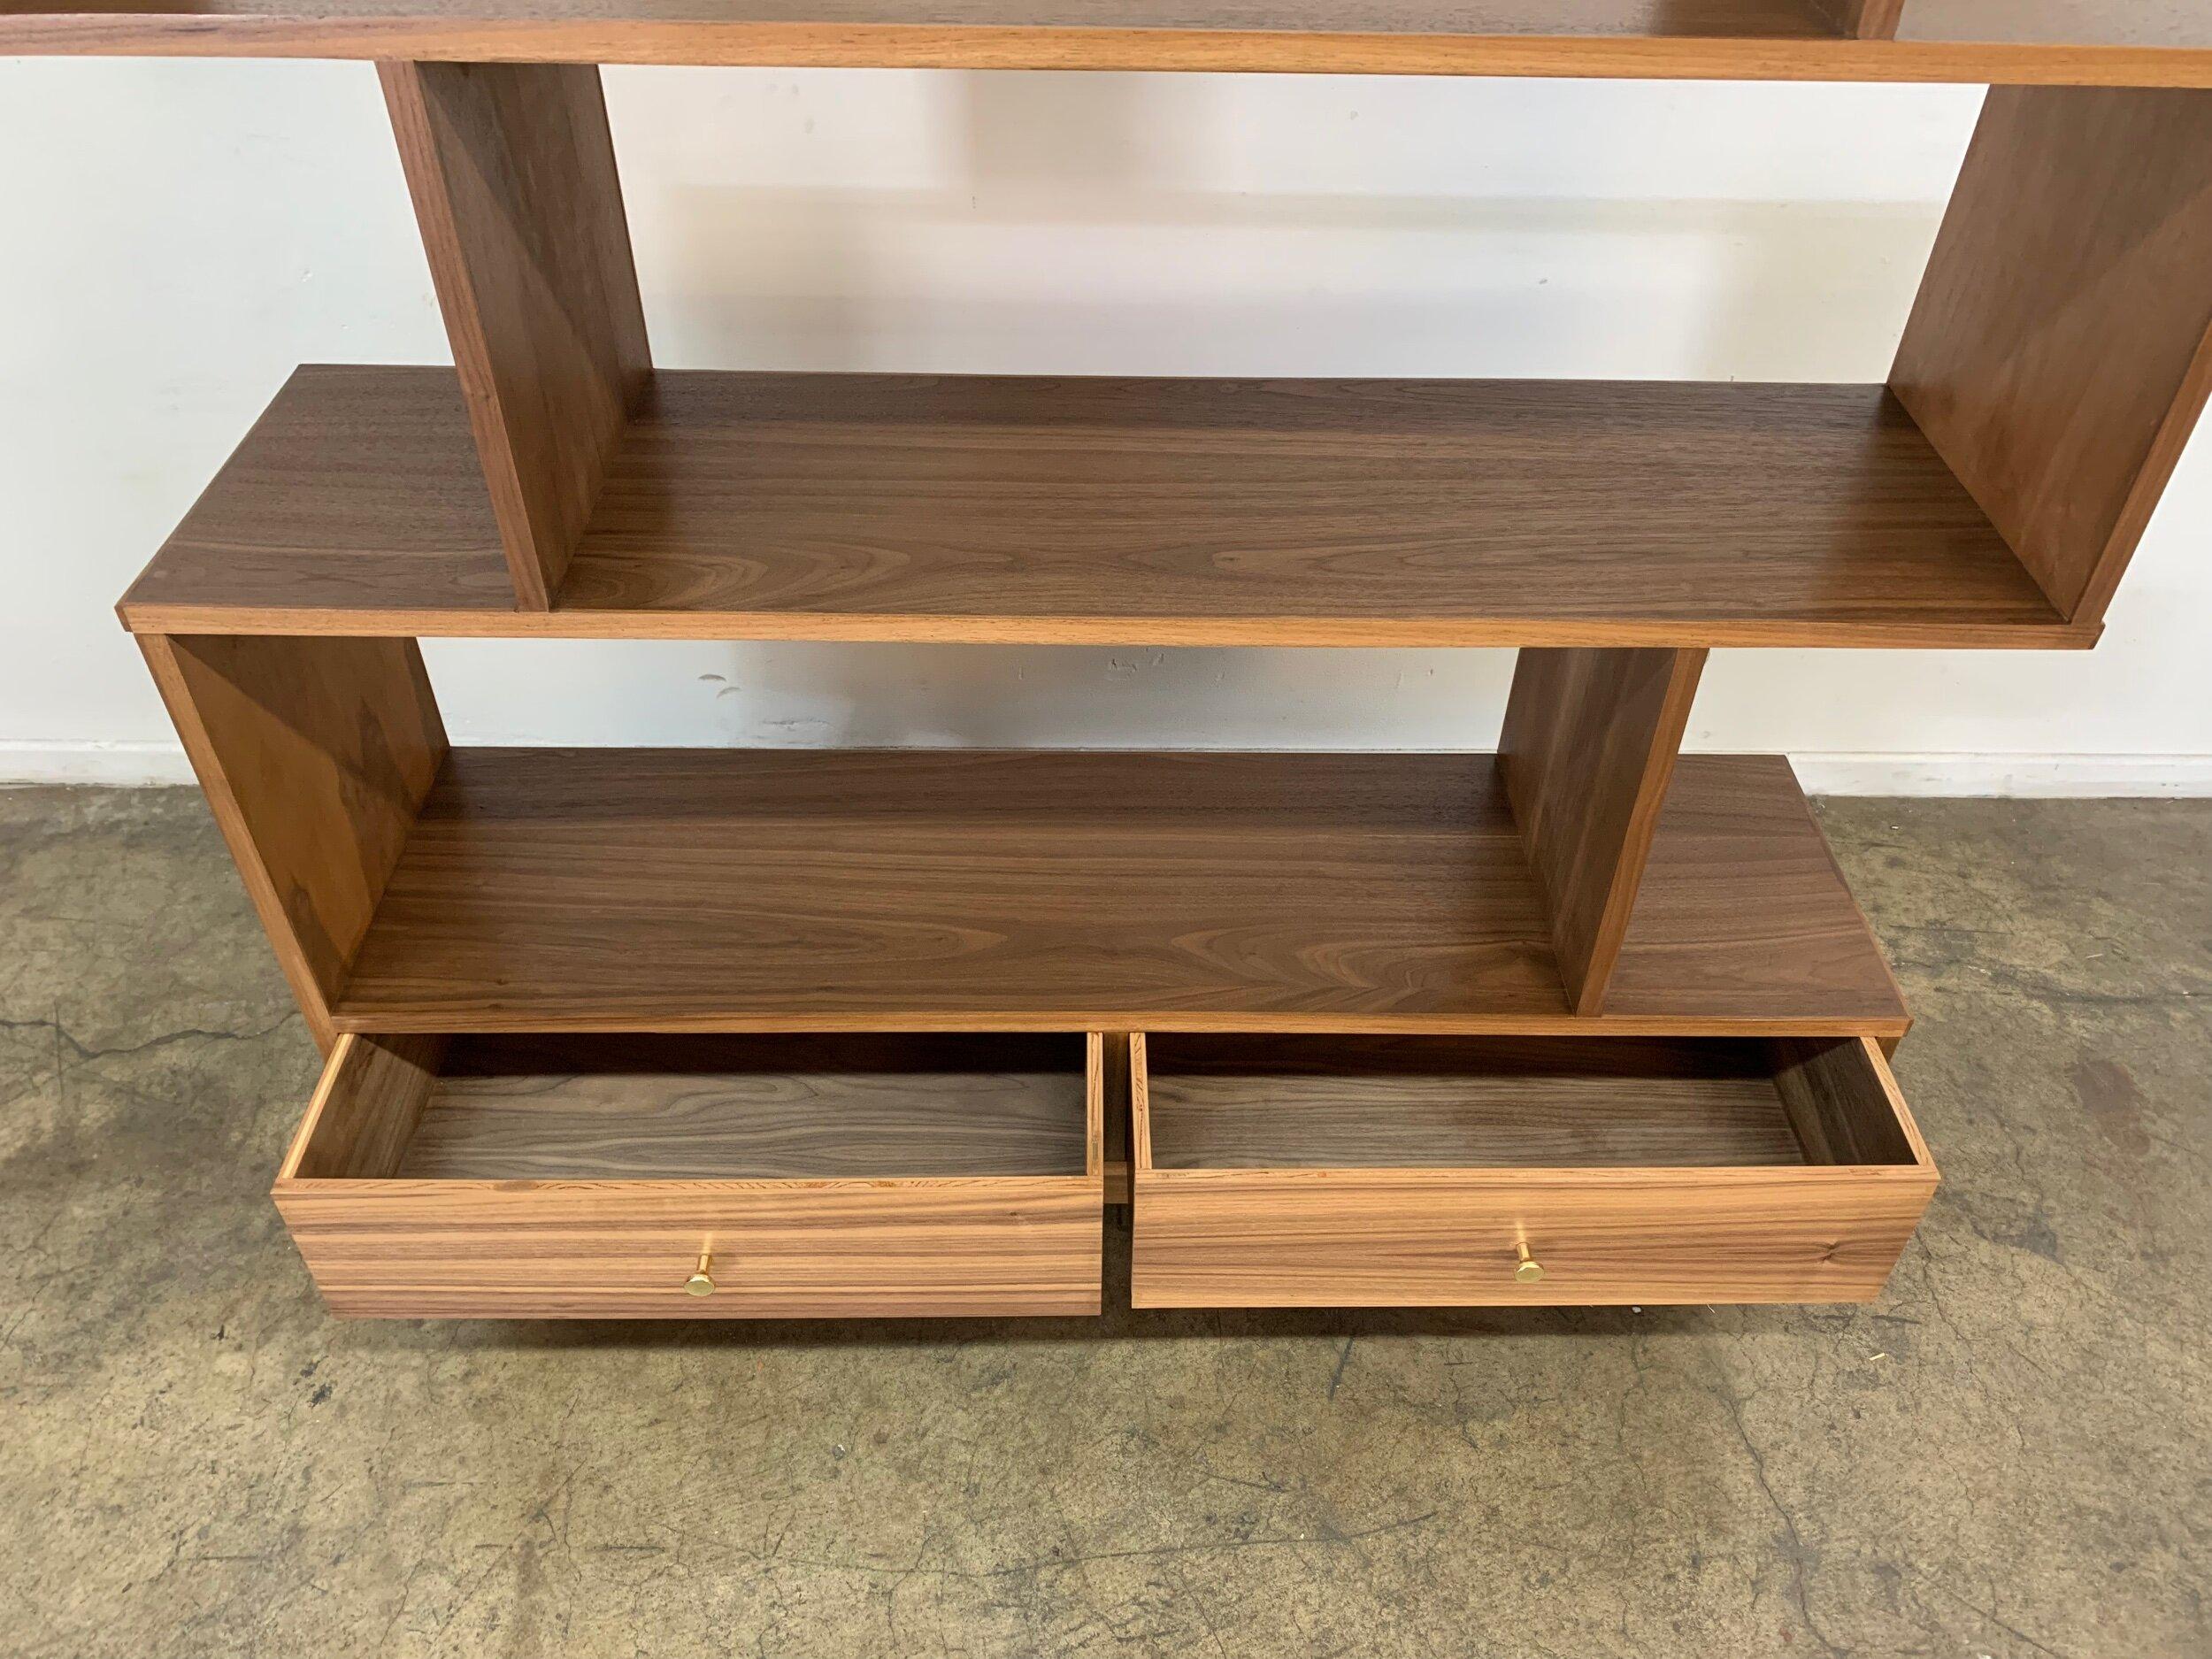 Mid-Century Modern Staggered Bookcase in Walnut -double closed- Floor model in San Francisco For Sale